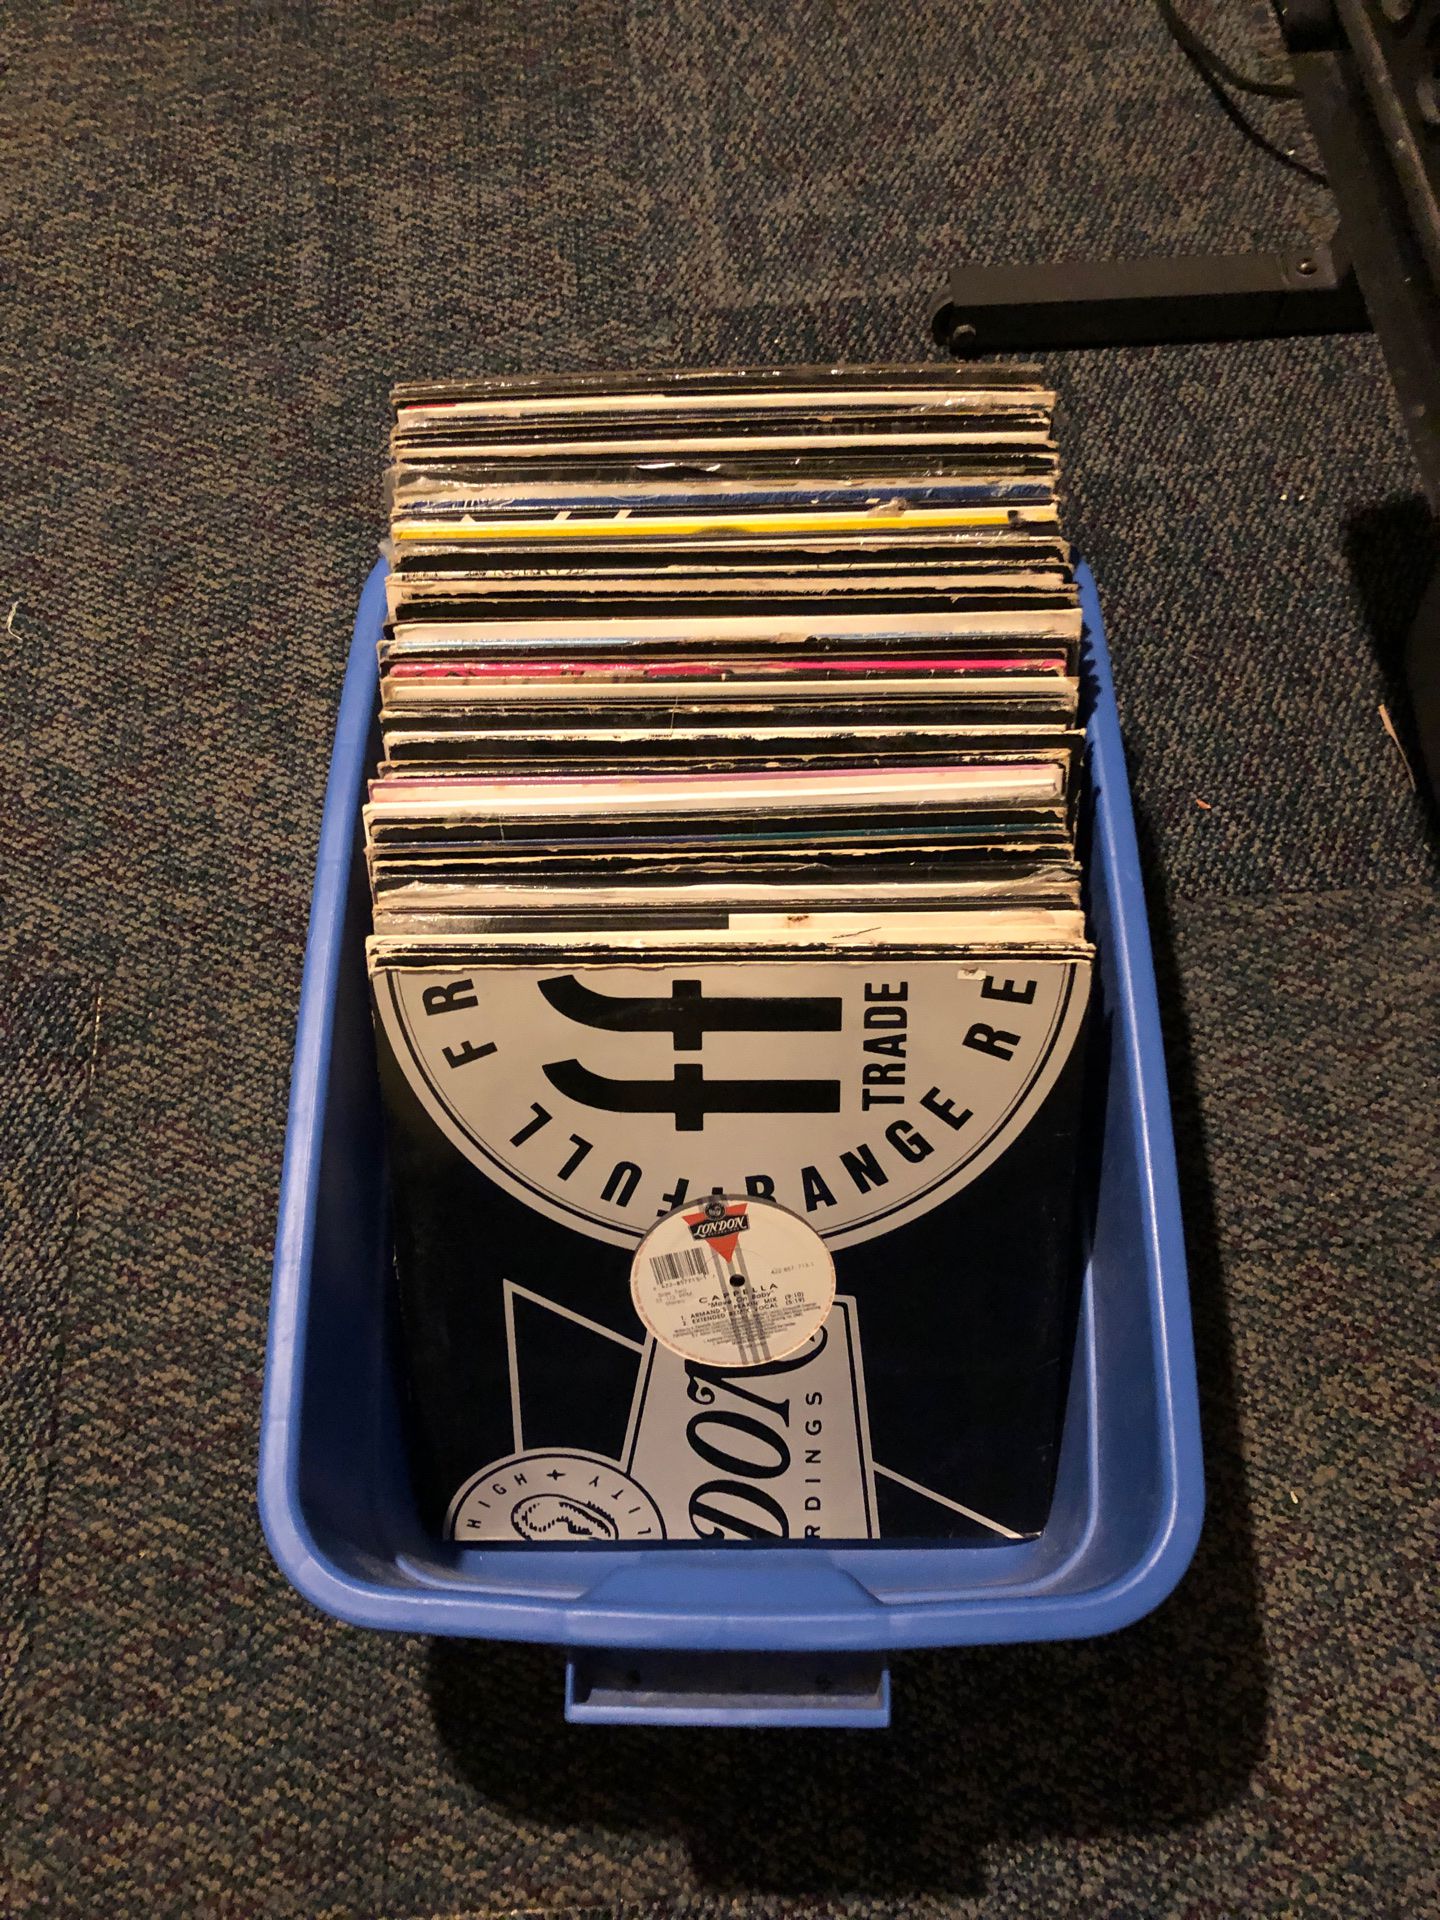 72 DJ Records all cleaned and playable